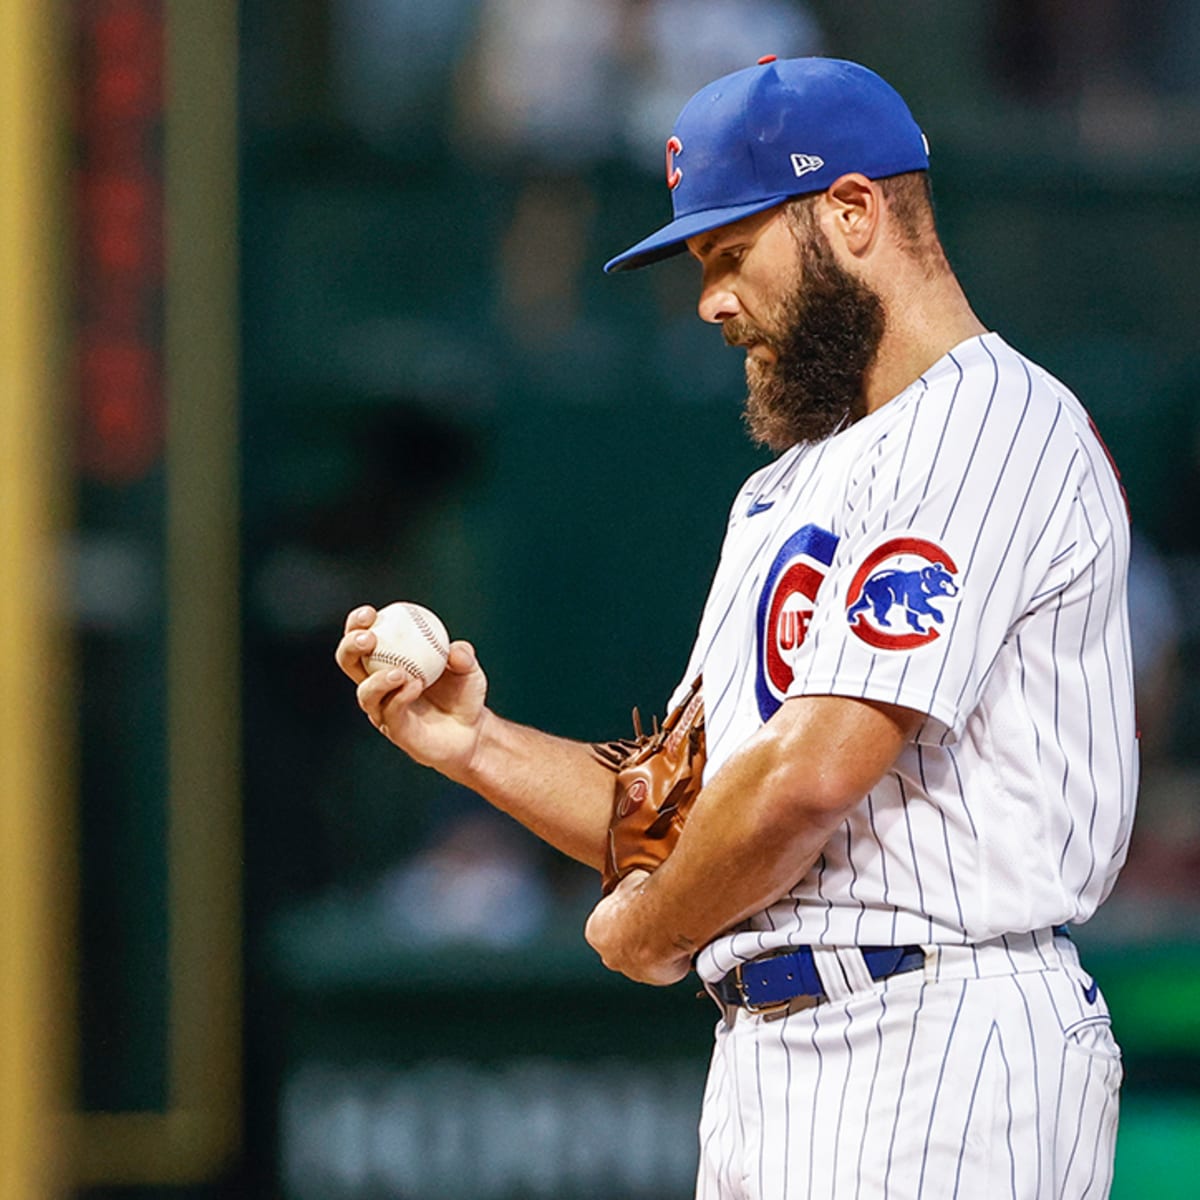 Jake Arrieta, Padres agree to deal after release by Cubs - Sports